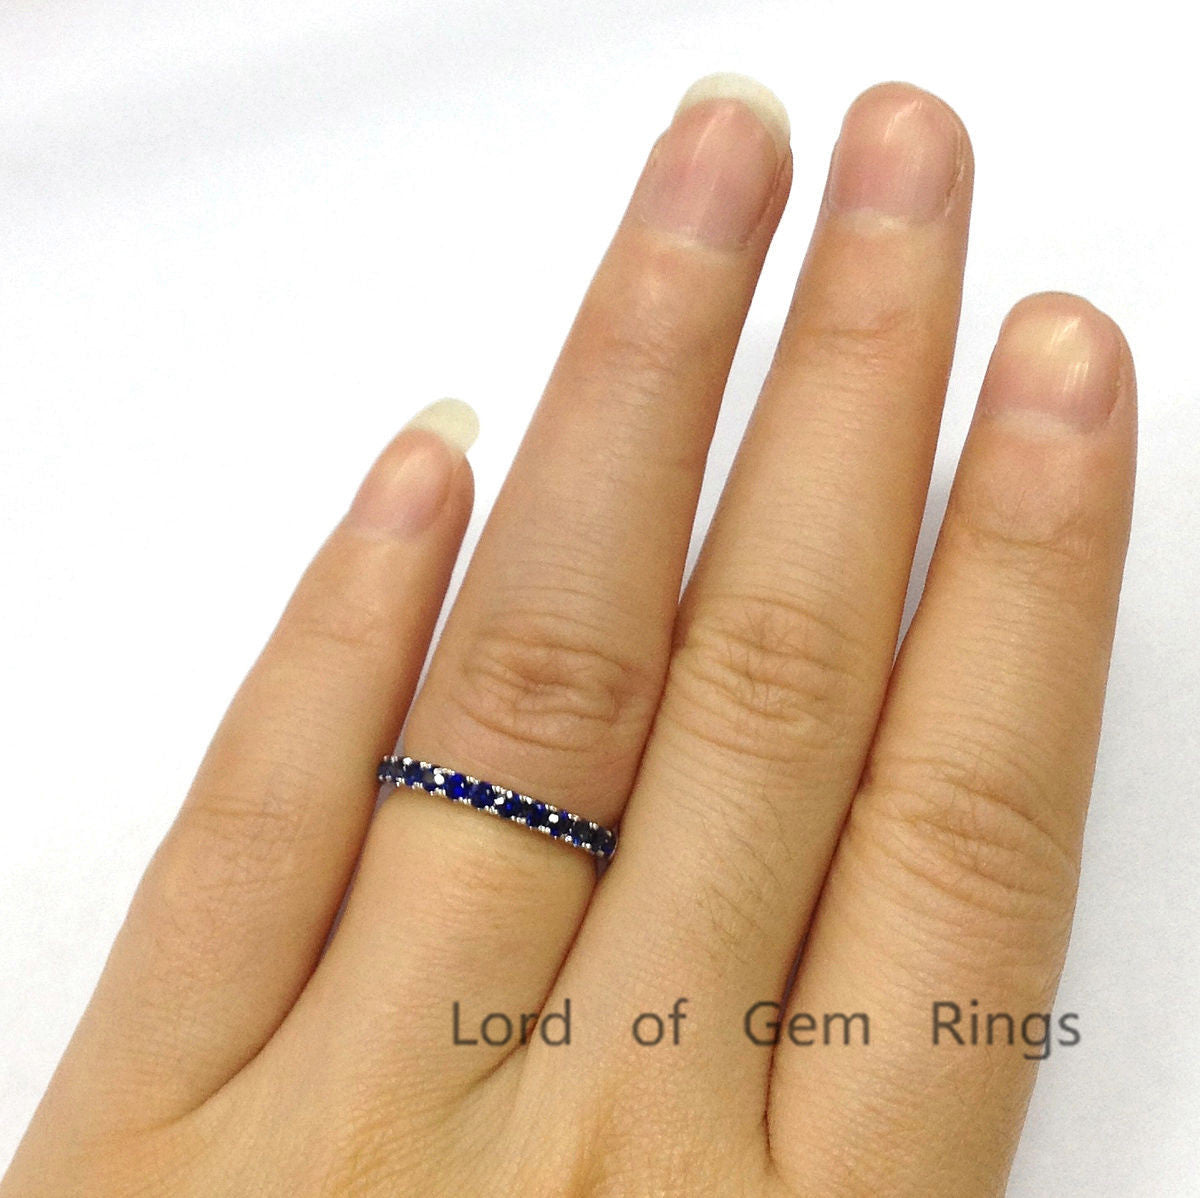 Sapphire Wedding Band Half Eternity Anniversary Ring 14K White Gold 2mm Stackable - Lord of Gem Rings - 4